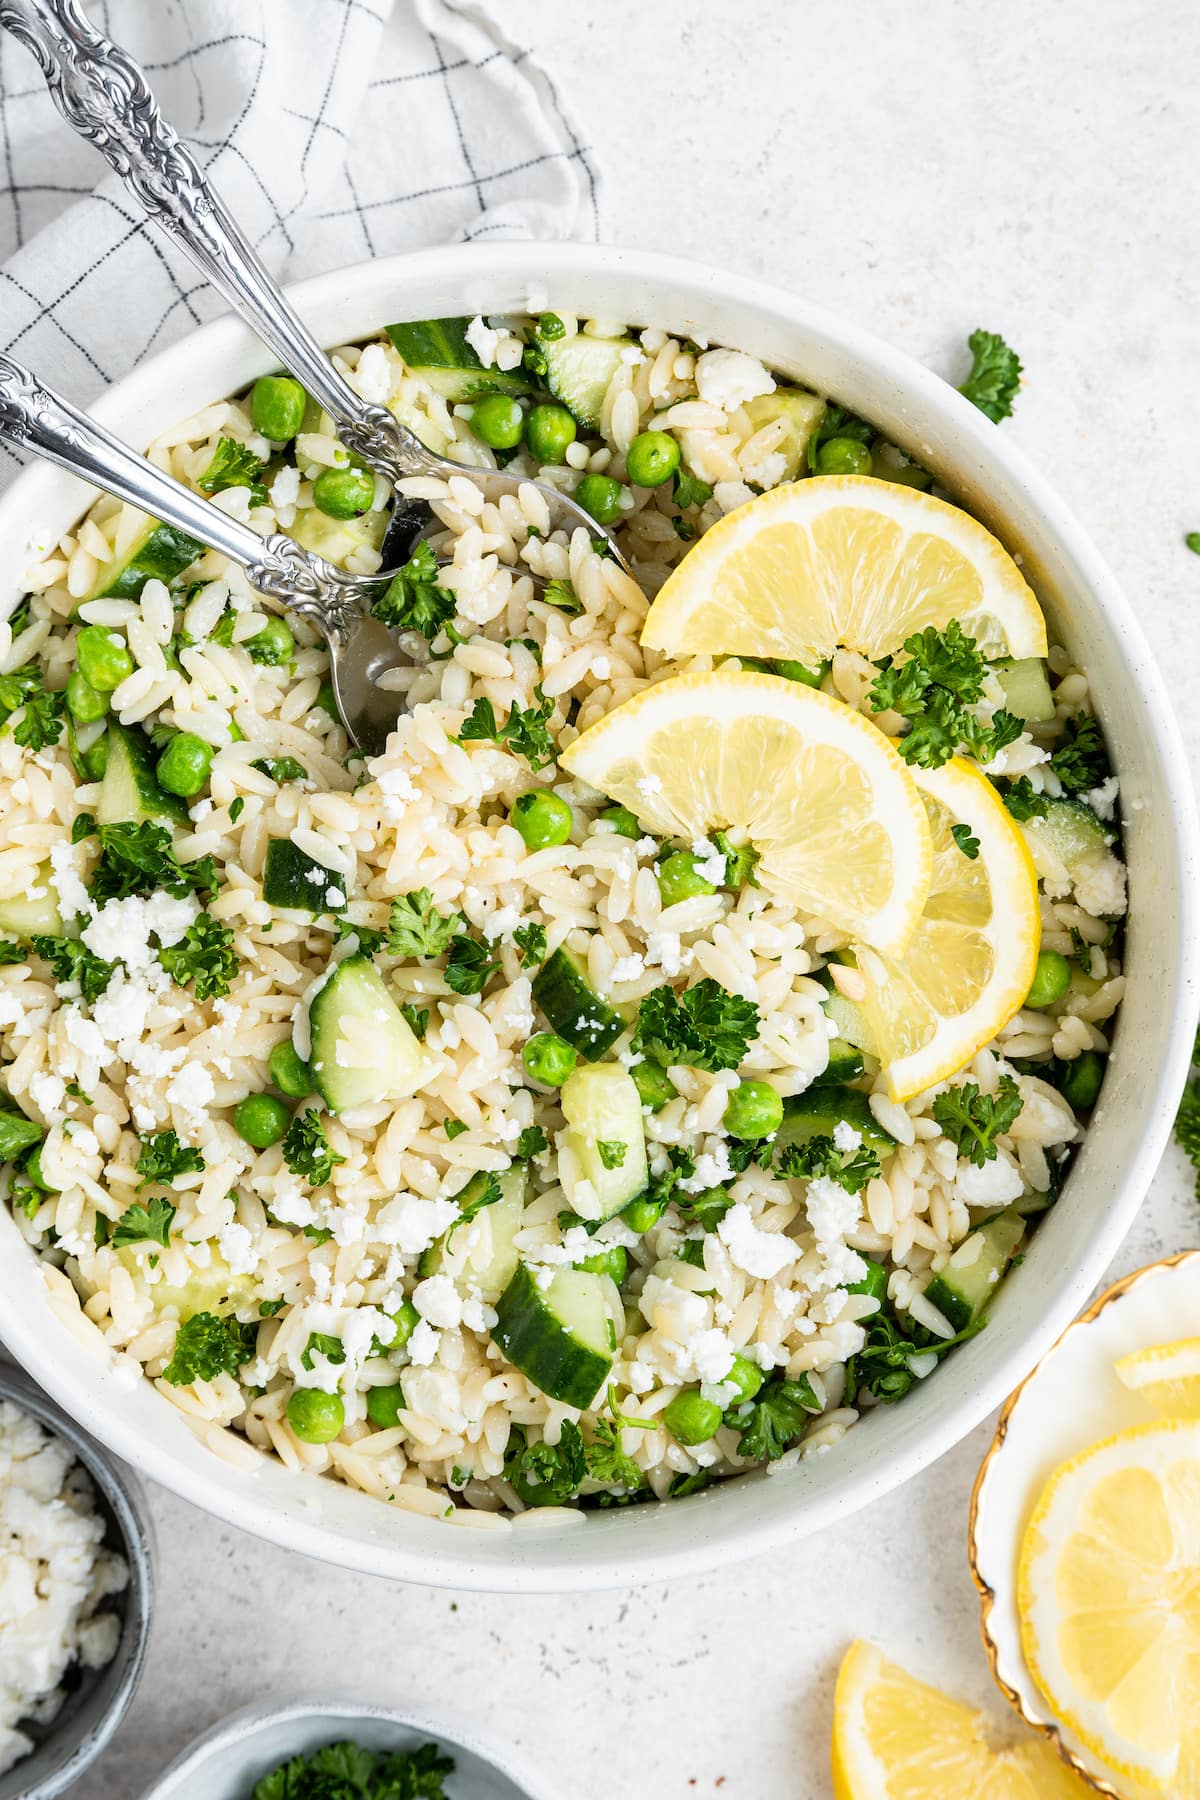 Lemon orzo salad with fresh lemon slices in a white bowl with metal serving spoons.